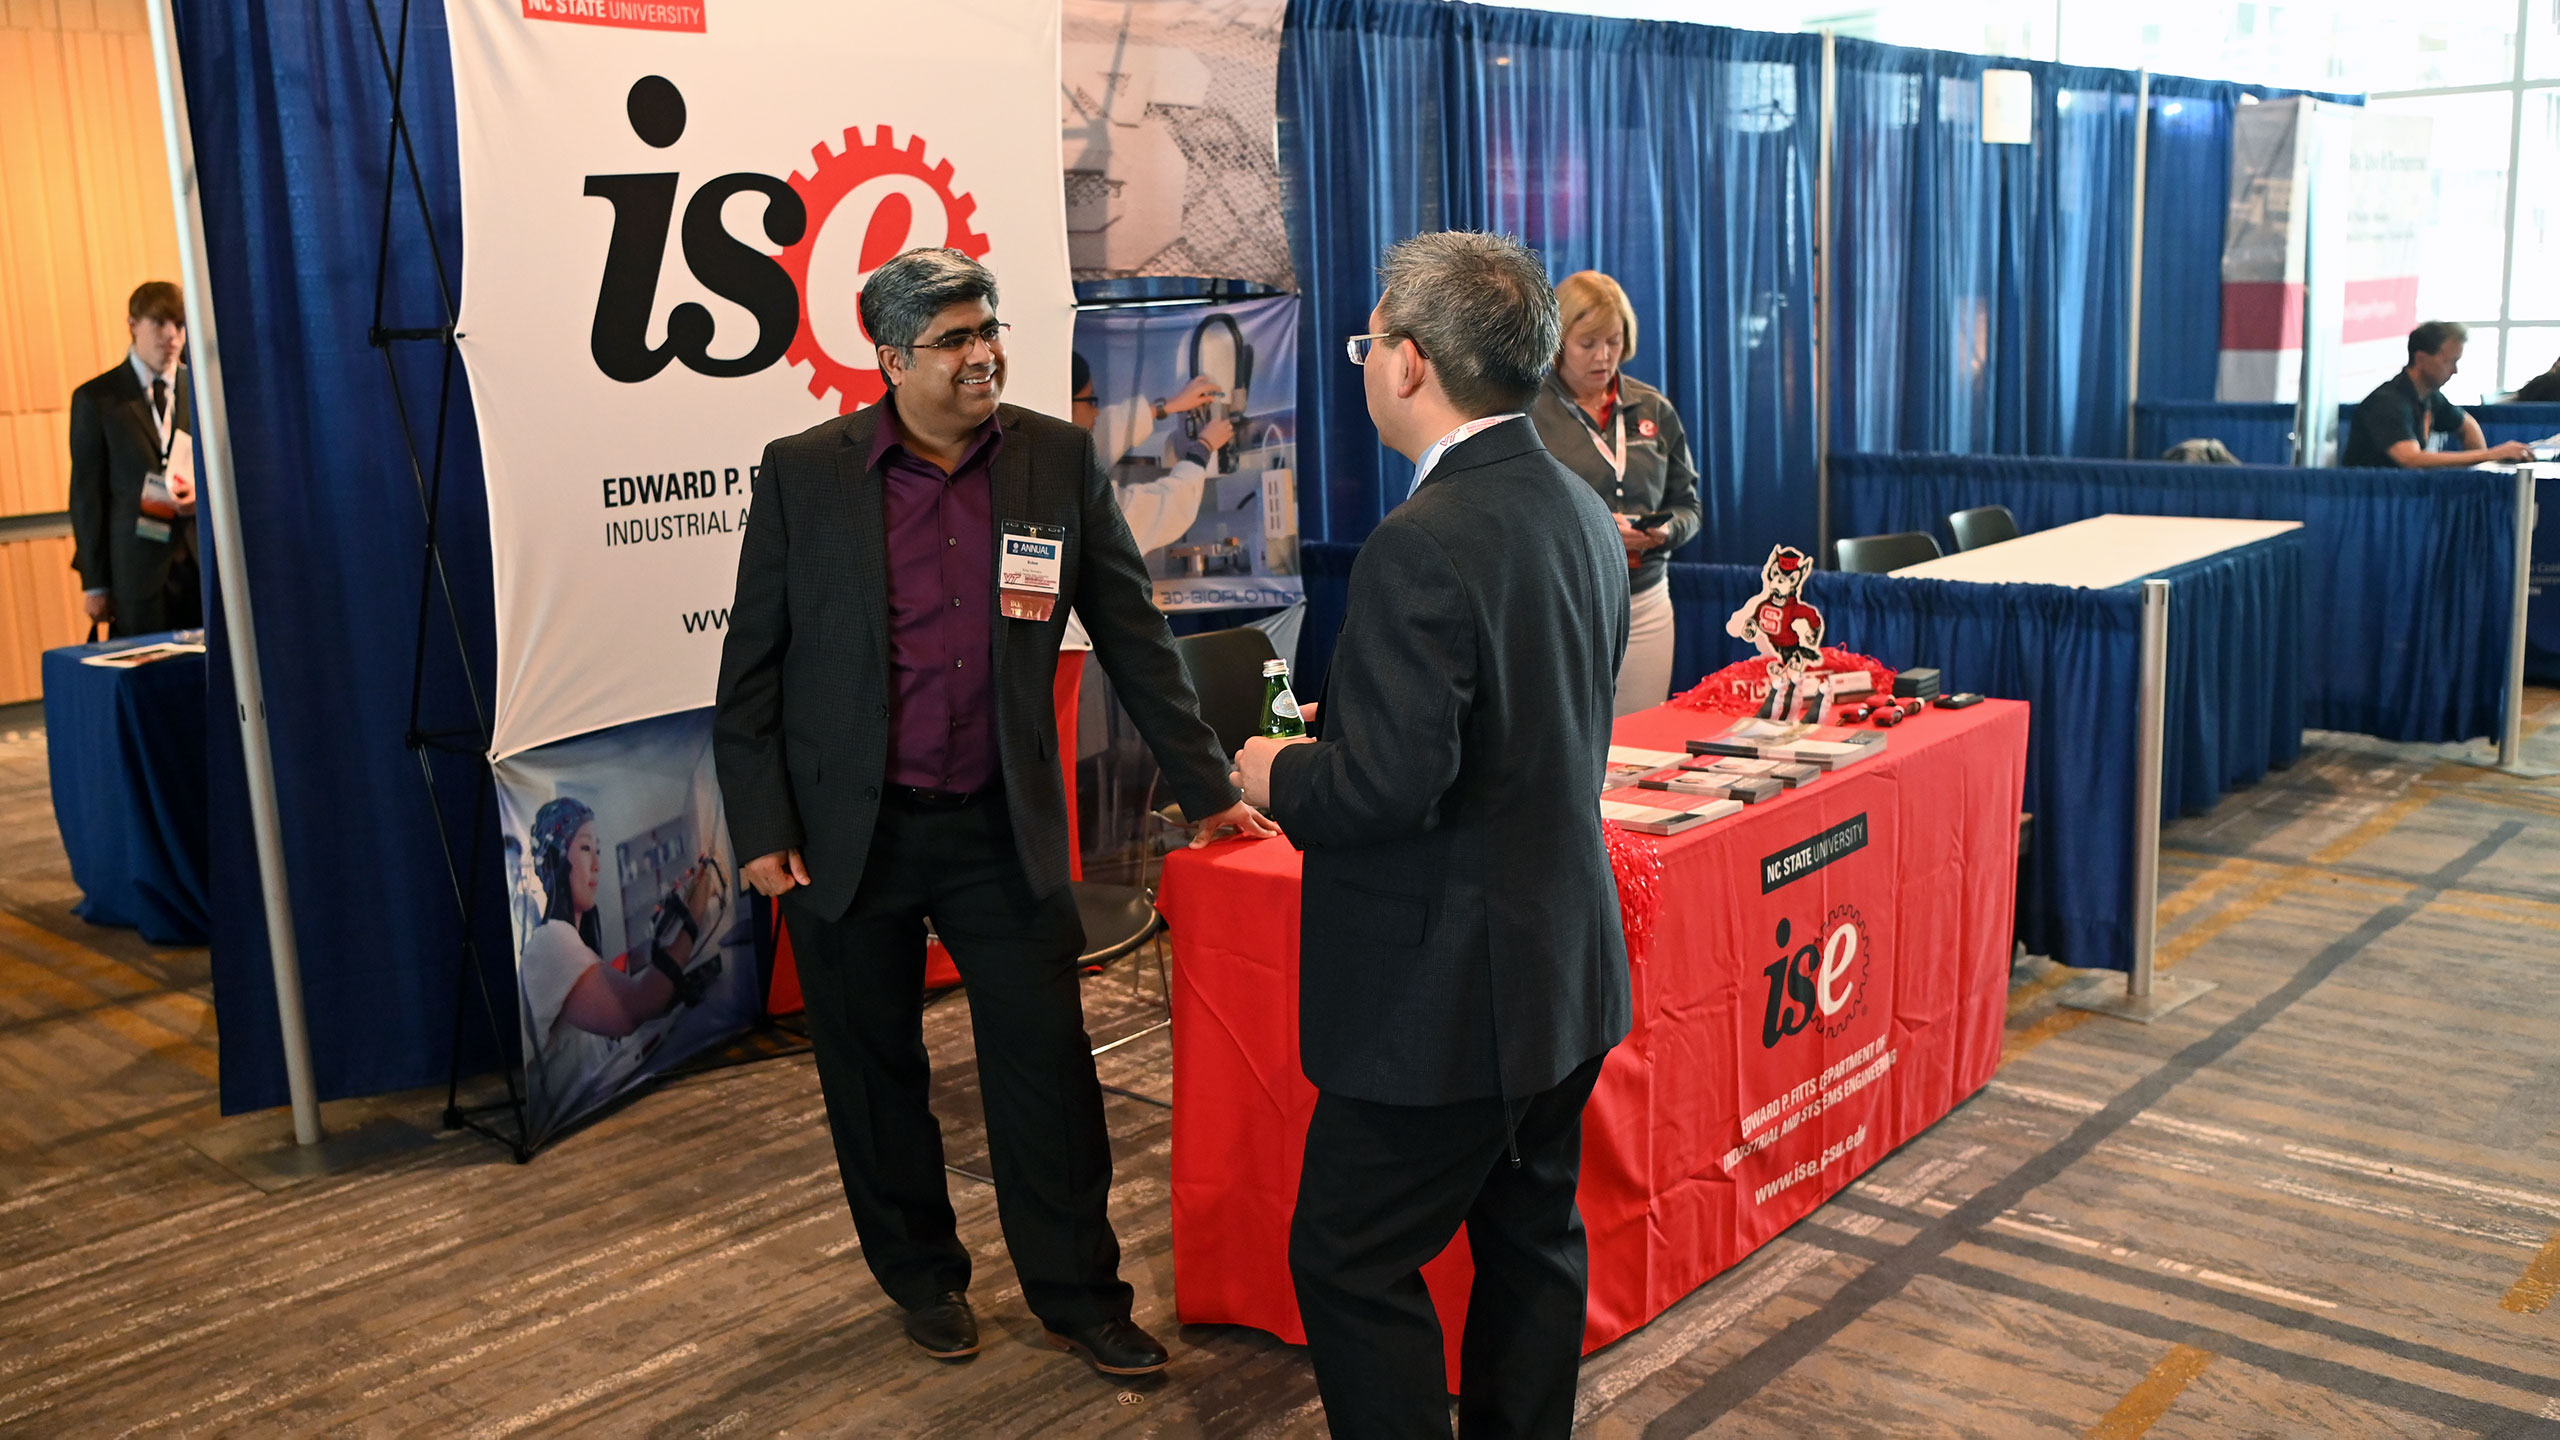 Rohan Shirwaiker talking with a colleague at the ISE conference booth